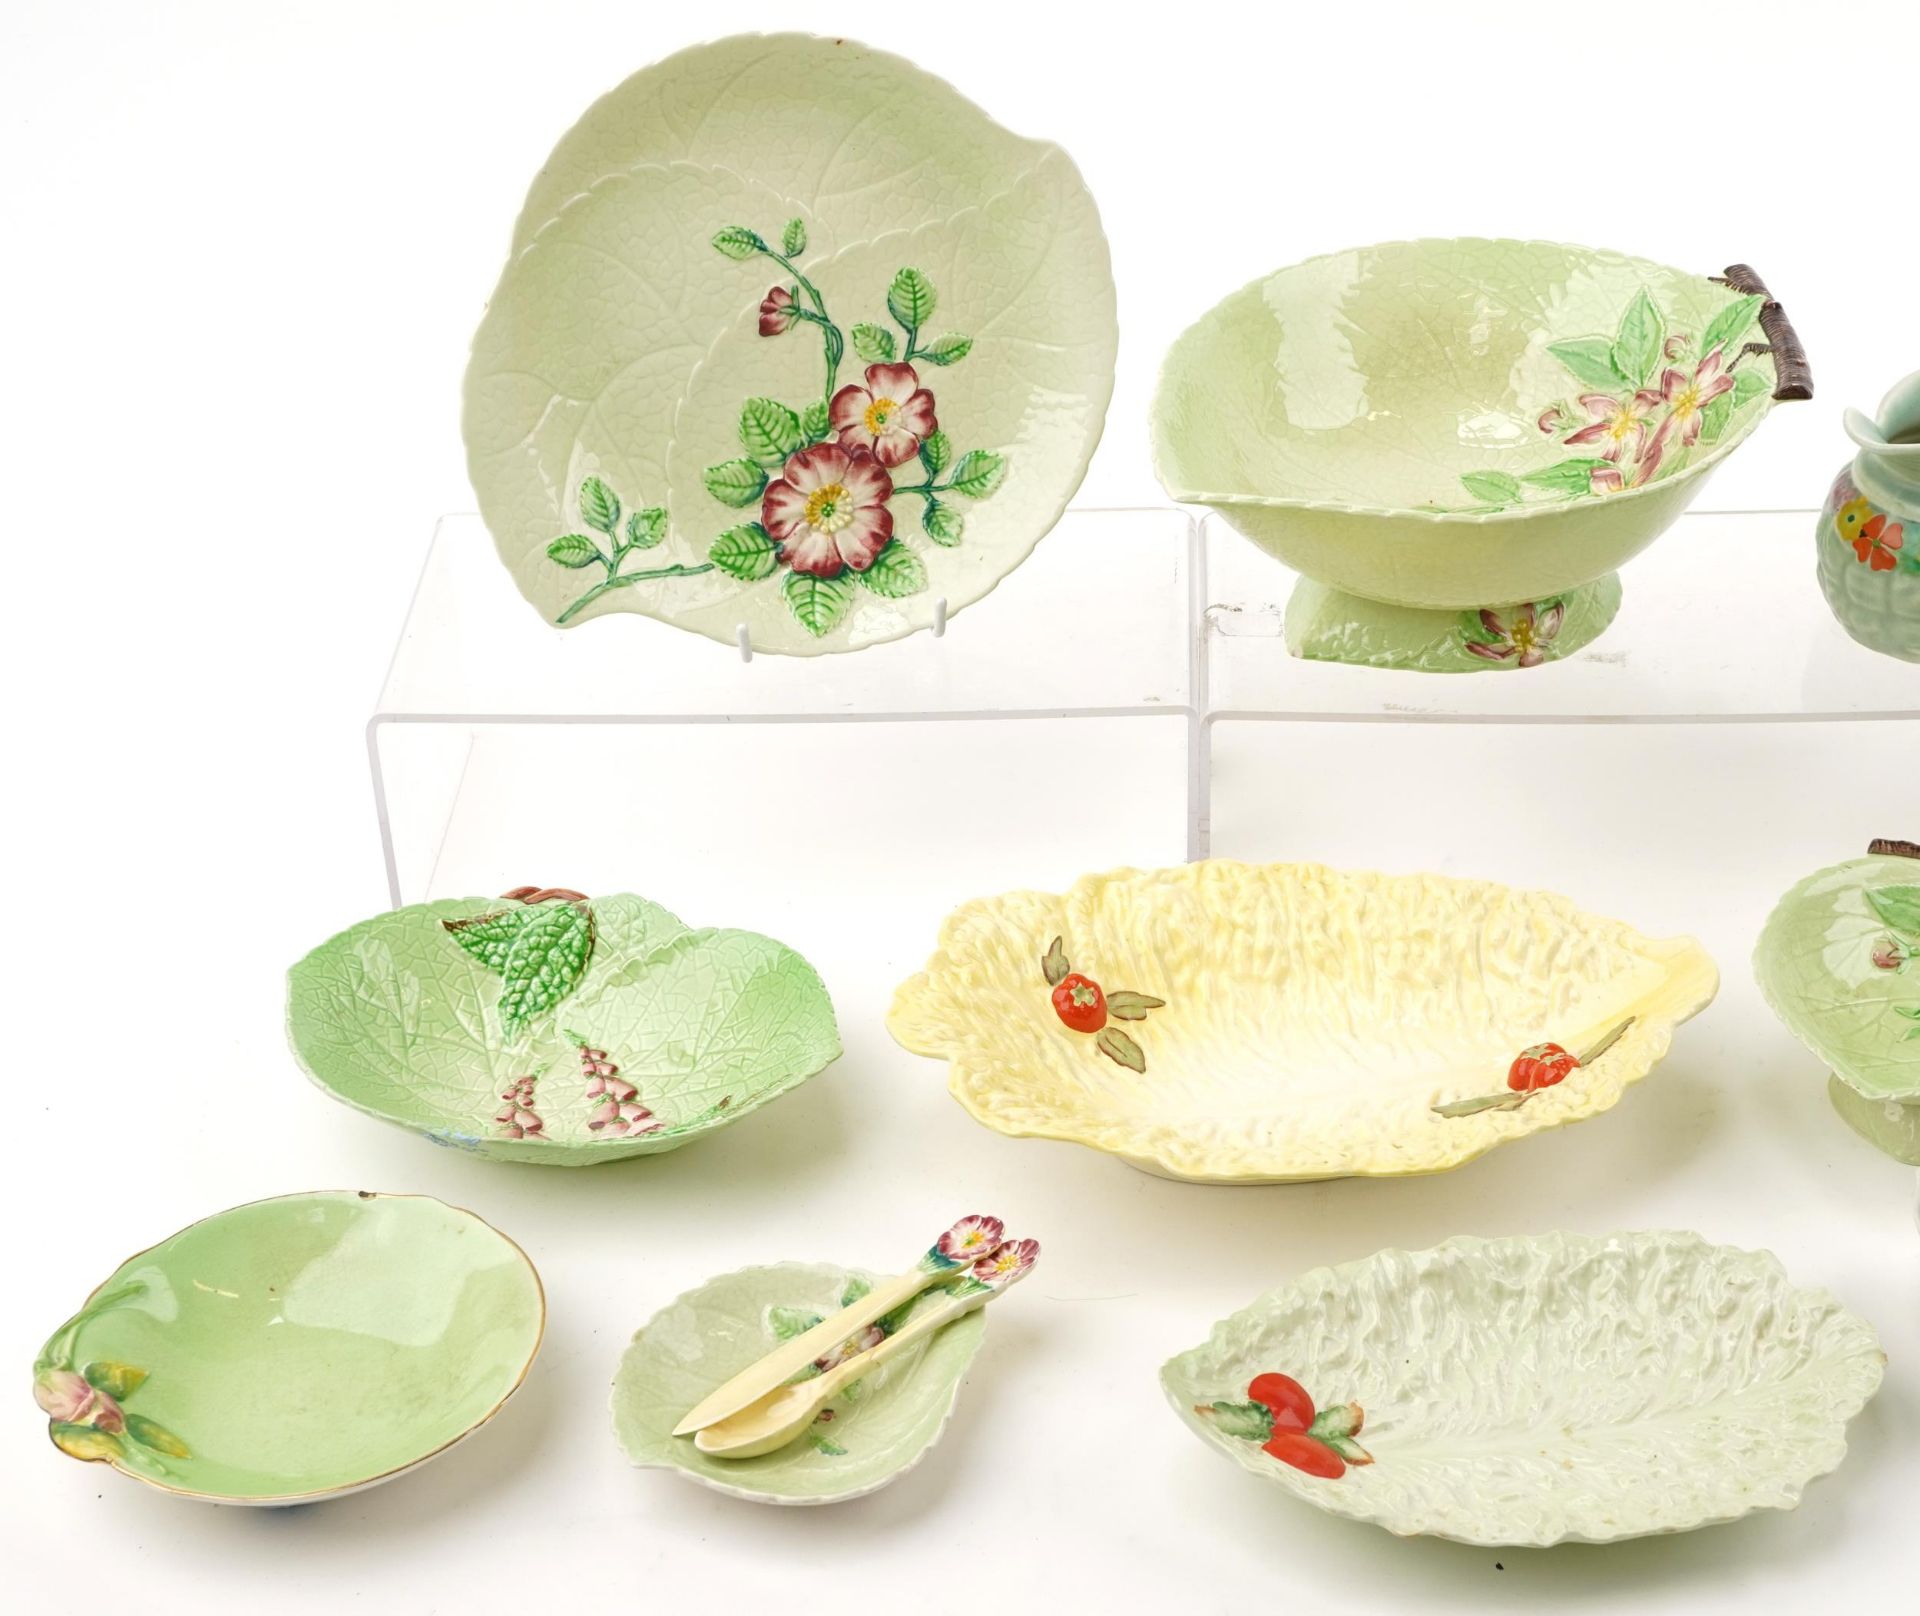 Carlton Ware collectable china including leaf dishes and jug hand painted with flowers, the - Image 2 of 4